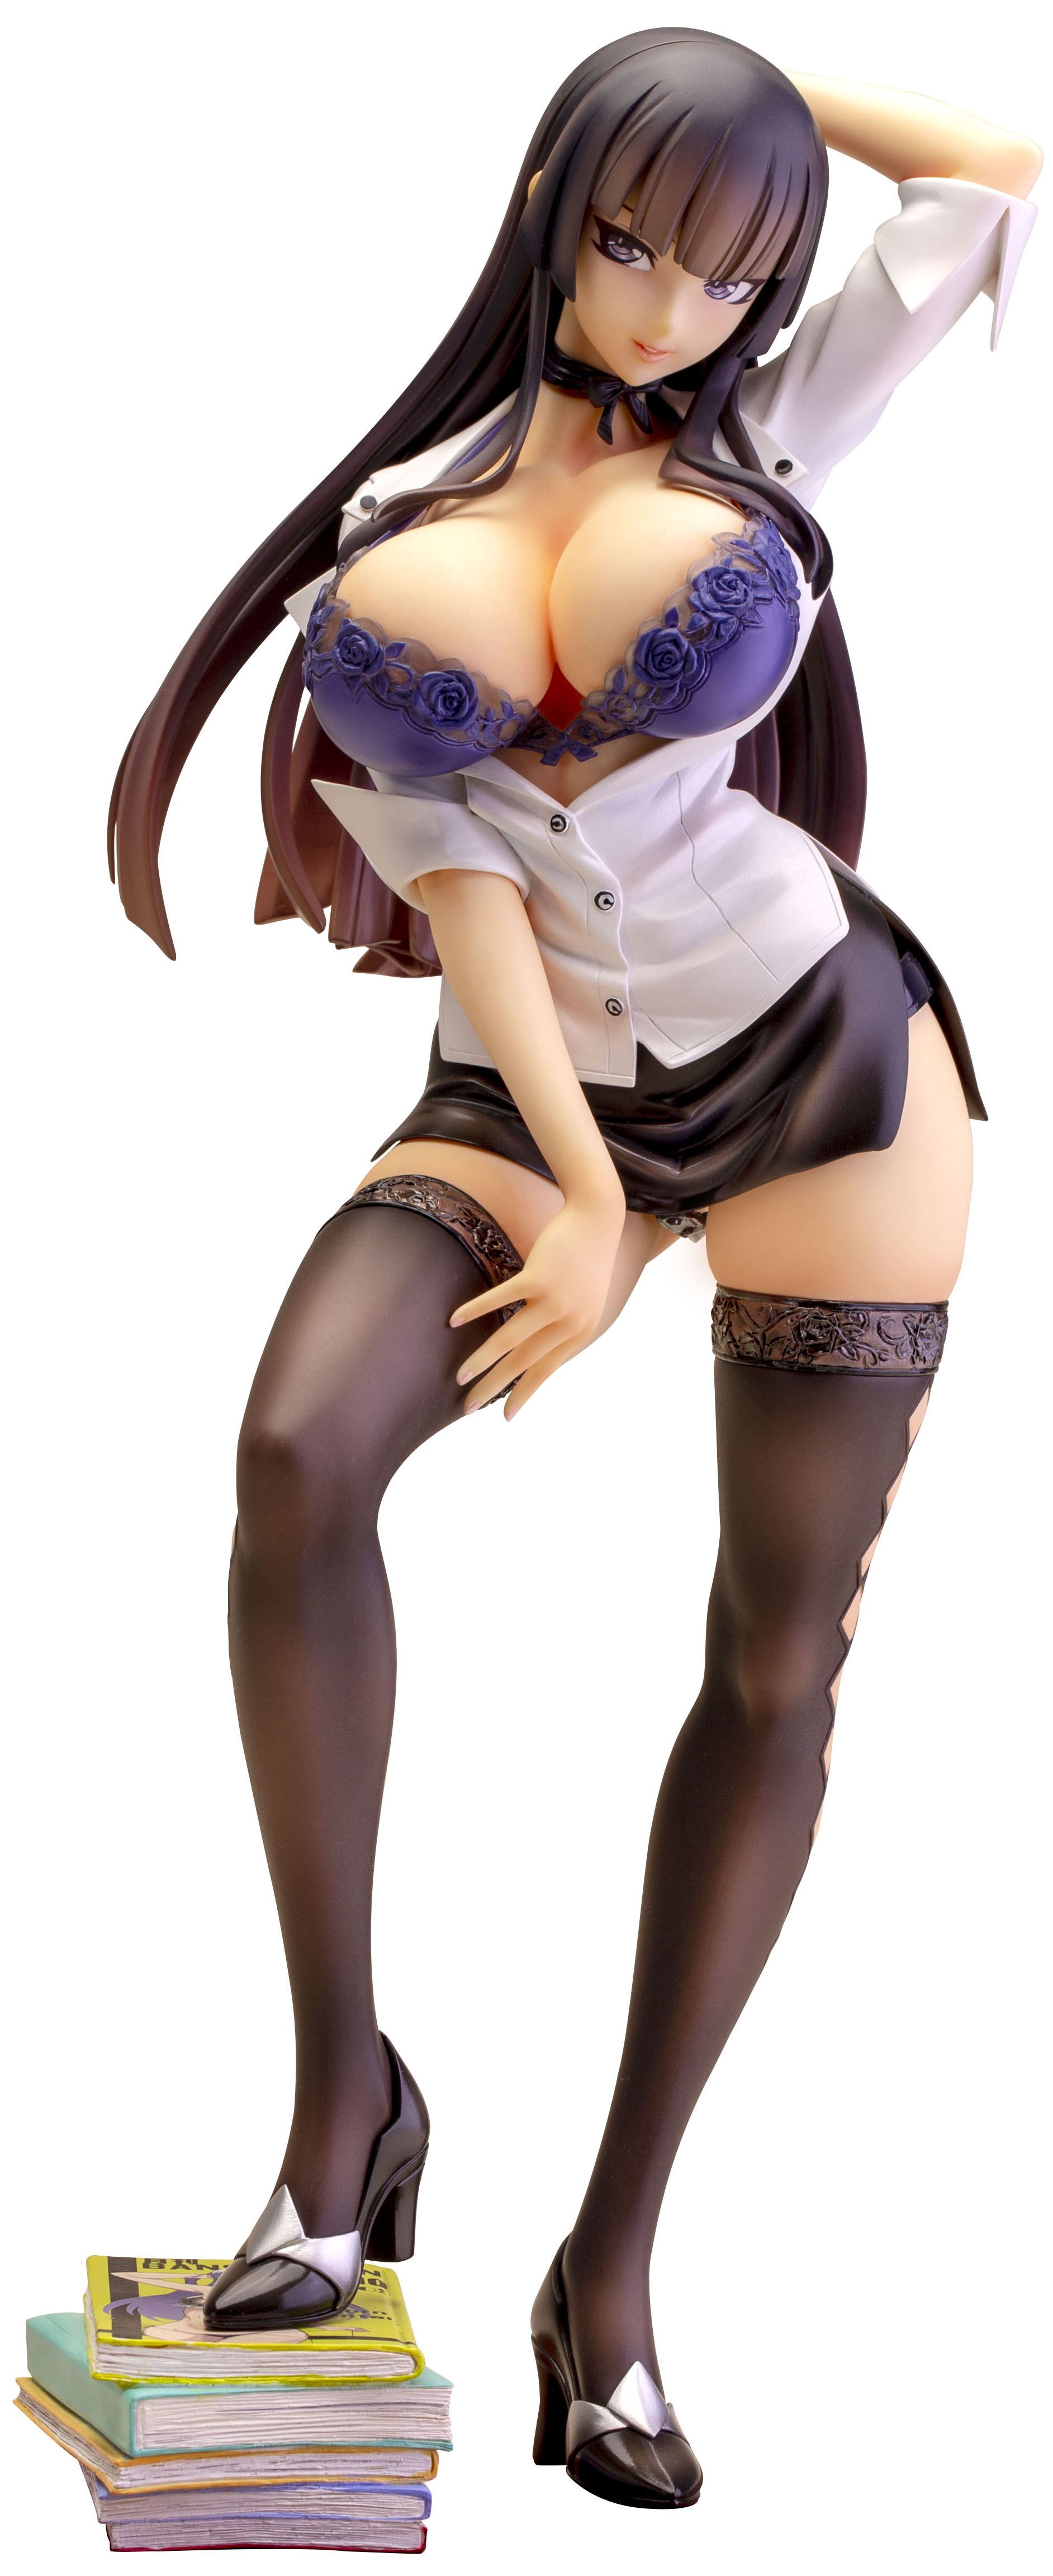 ORIGINAL CHARACTER 1/7 SCALE PRE-PAINTED FIGURE: AYAME BY BAN! Sky Tube